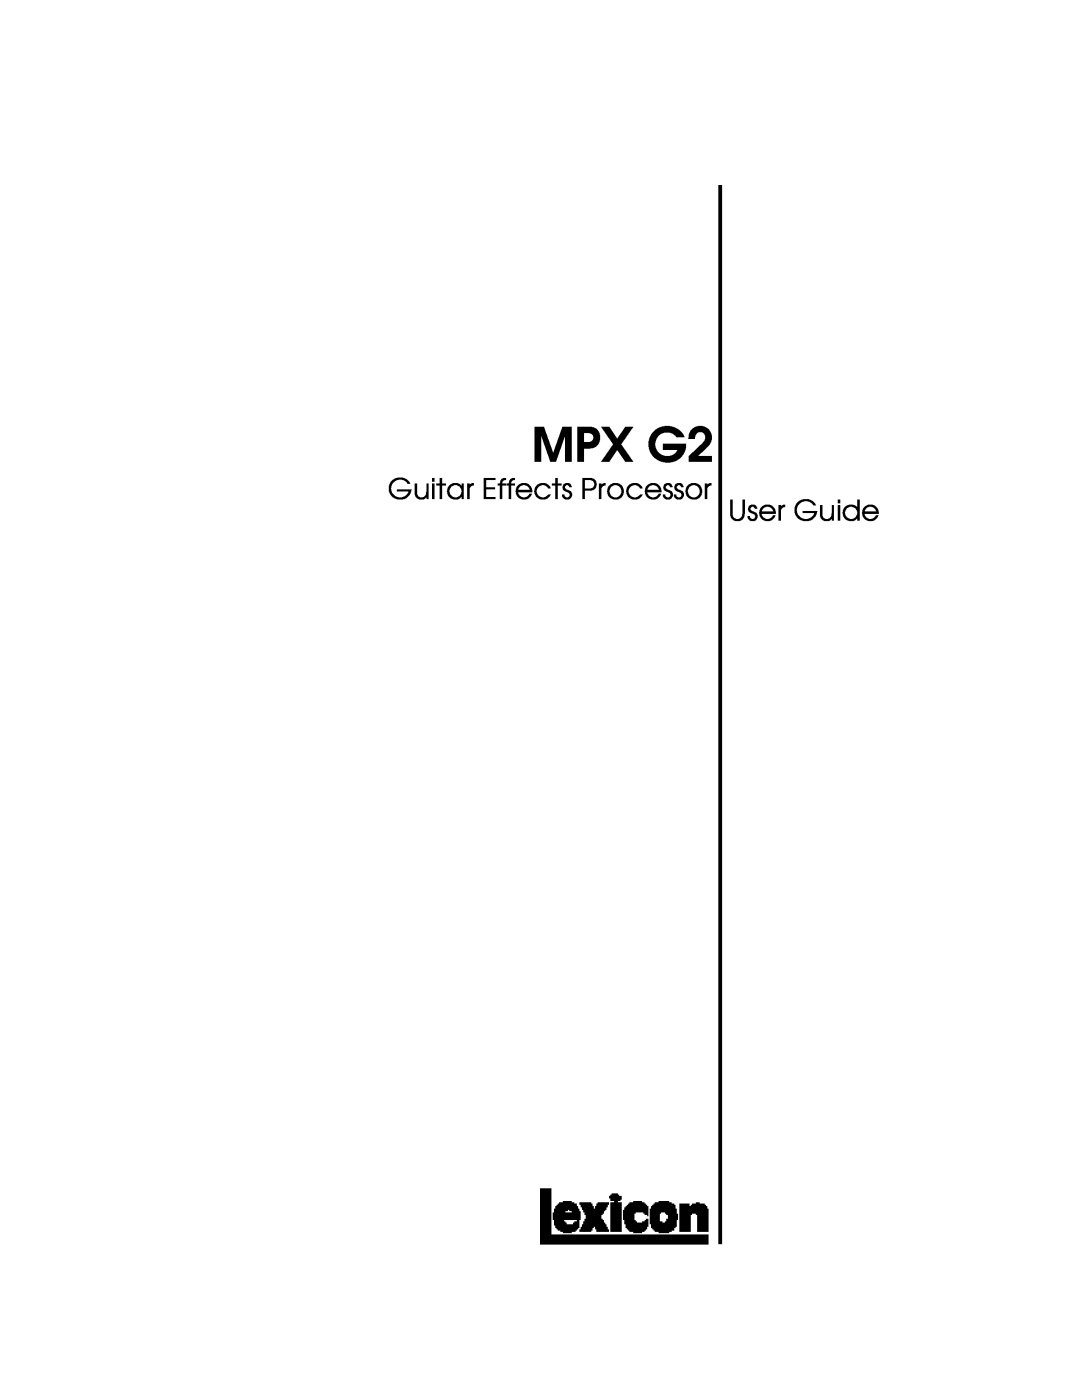 Lexicon MPX G2 manual Guitar Effects Processor User Guide 